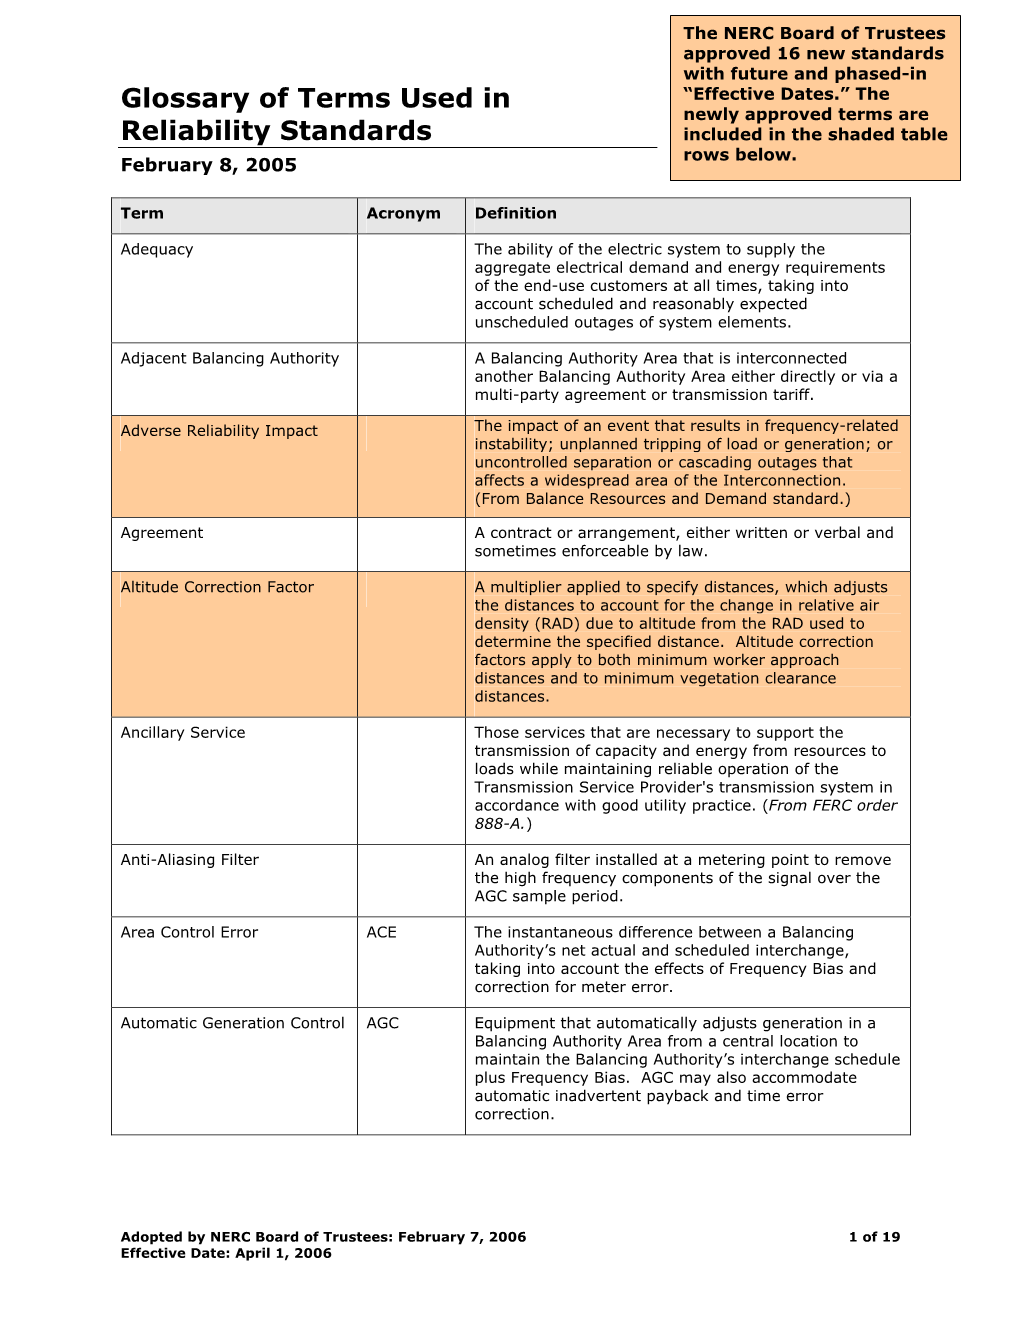 Glossary of Terms Used in Reliability Standards